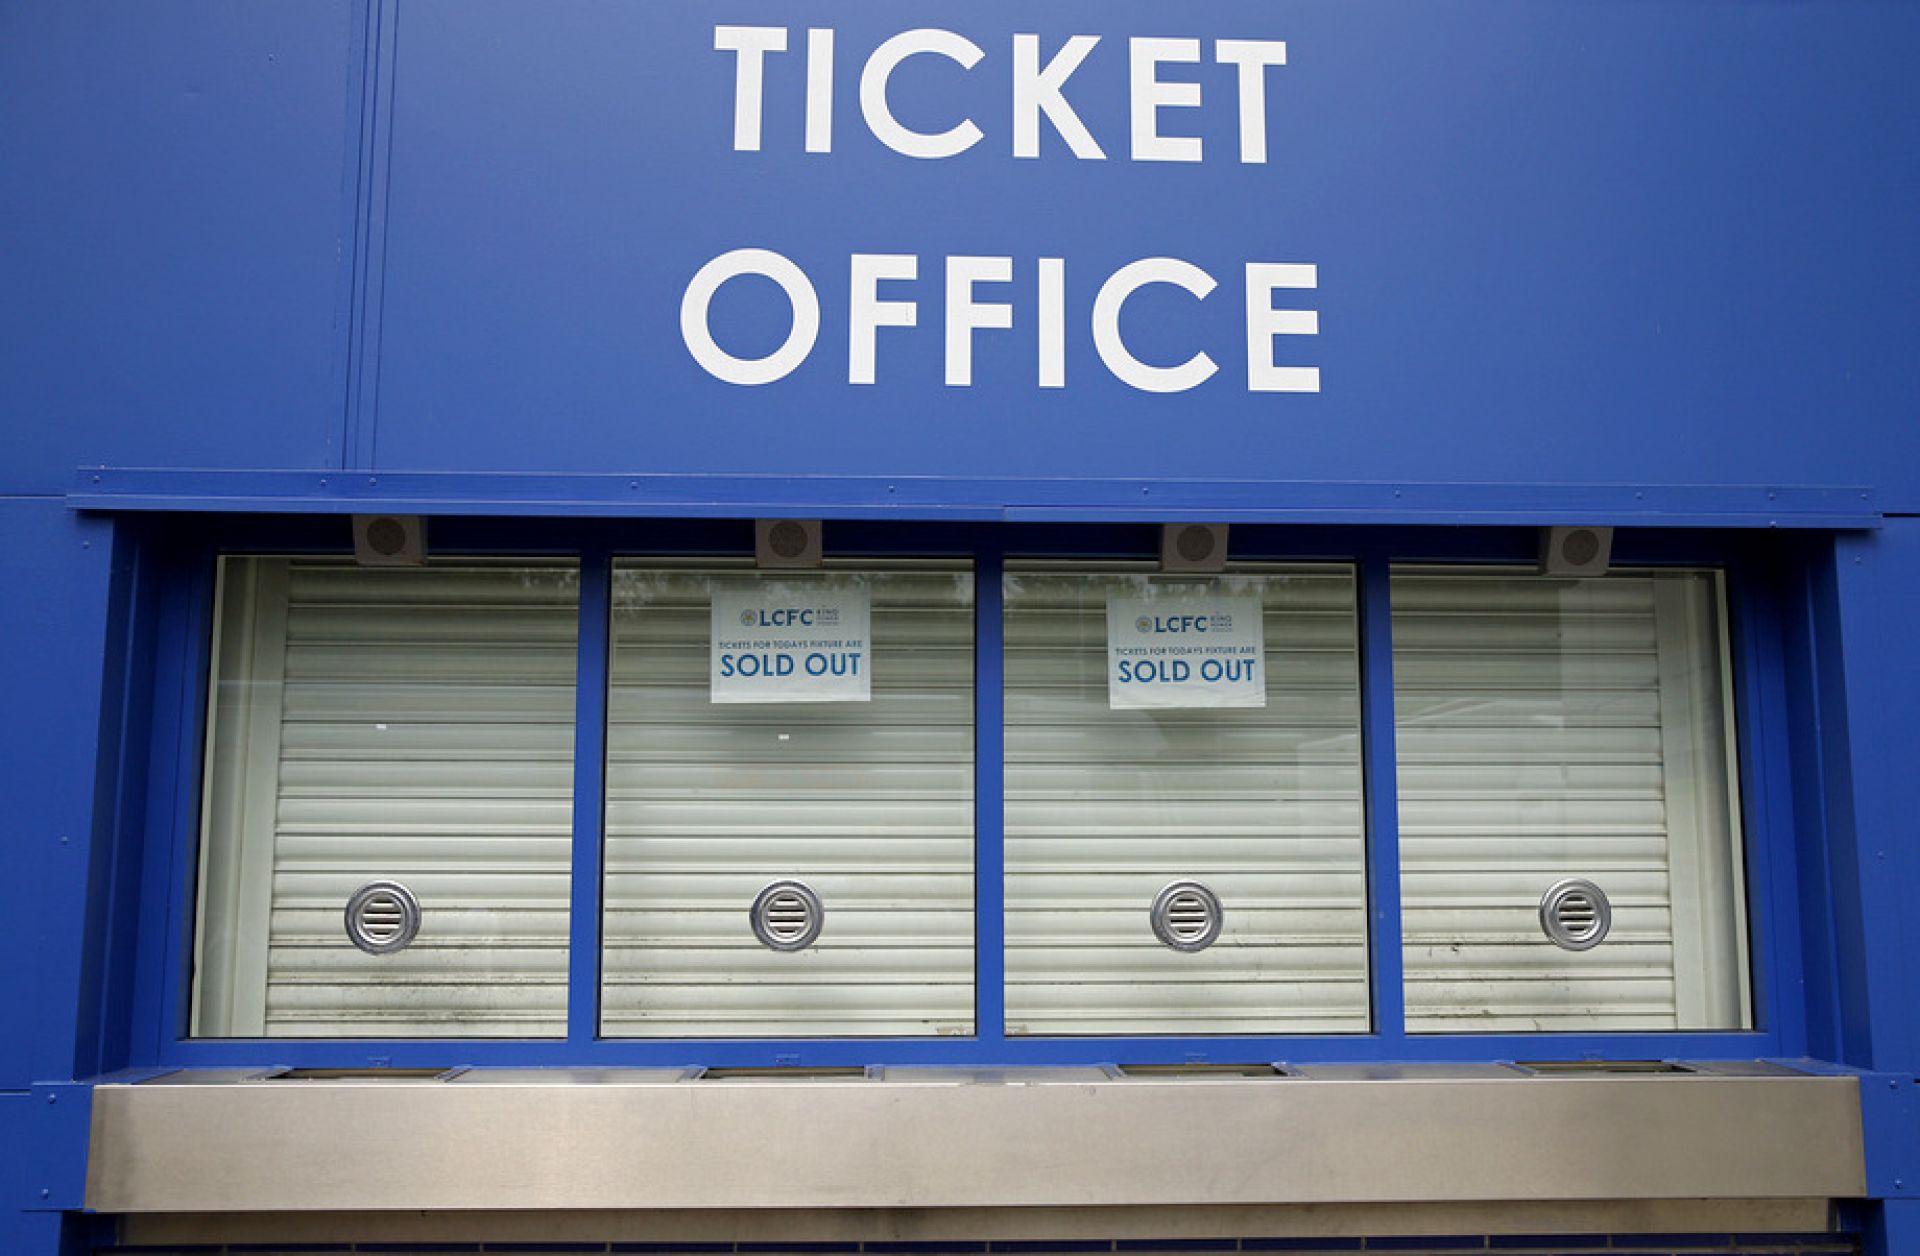 Is the ticket office